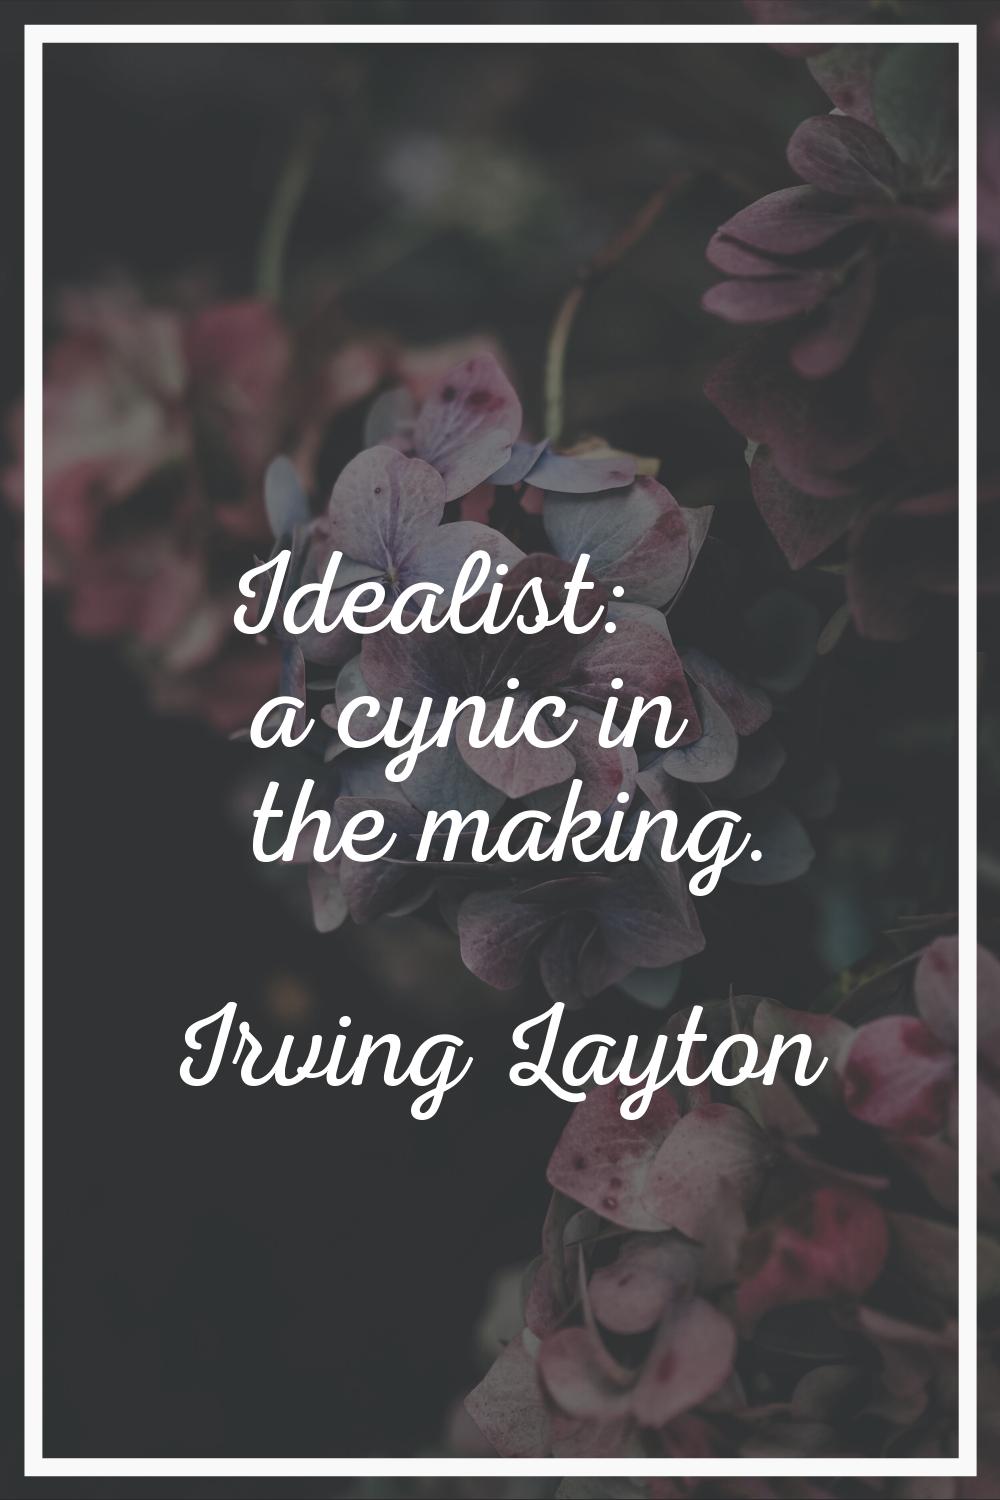 Idealist: a cynic in the making.